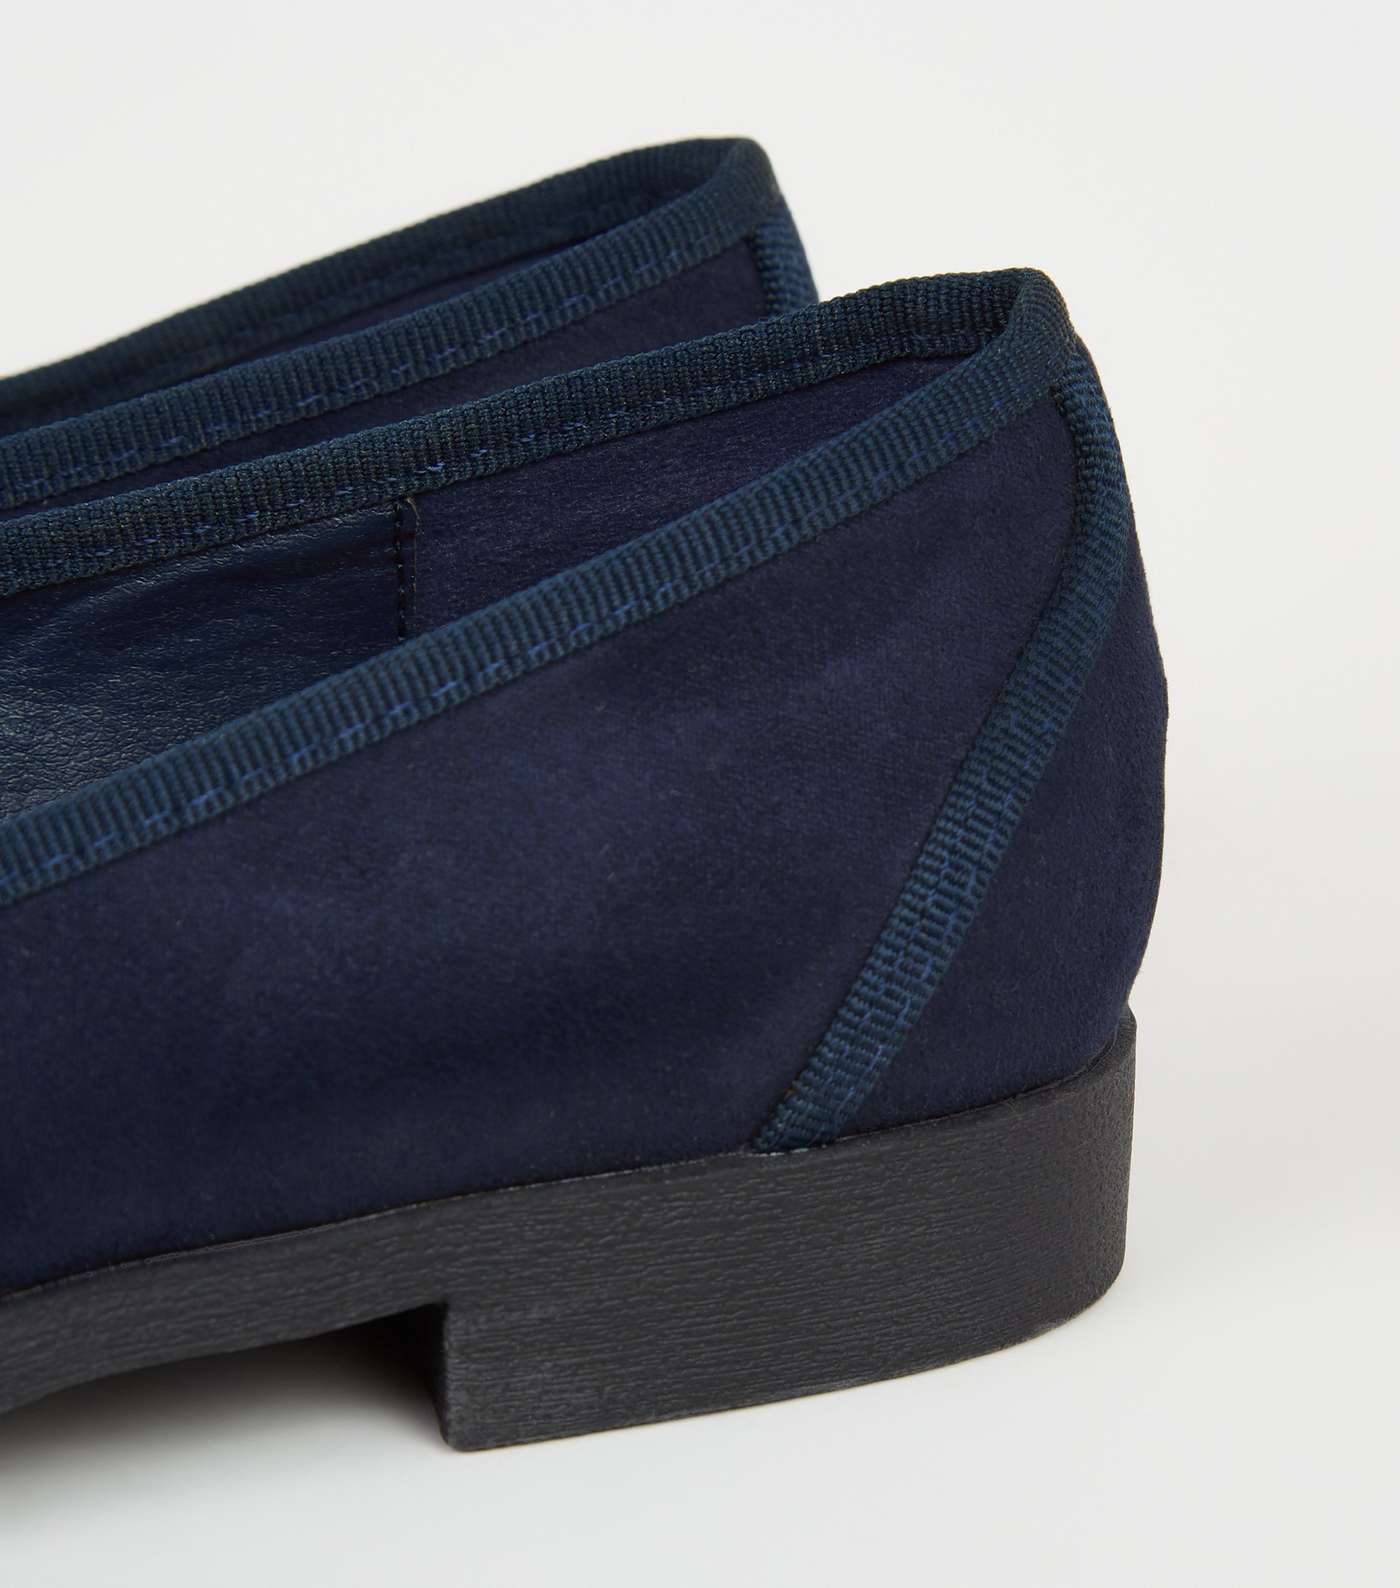 Wide Fit Navy Suedette Bow Front Loafers Image 4